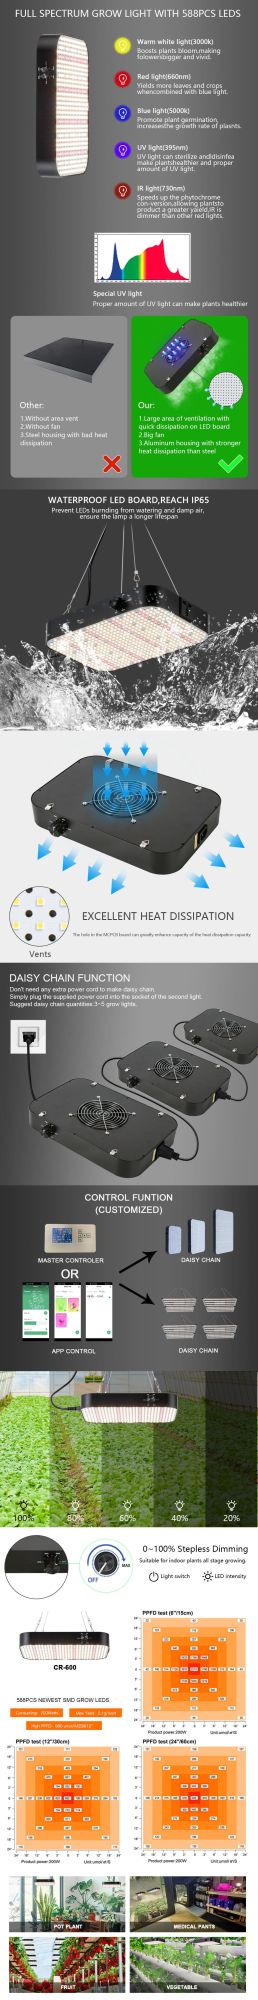 Indoor Office, Living Room, Grow Tent, Growers Choice 80W 588 LEDs Small Hanging Full Spectrum Best Mini Full Spectrum Light Bulbs for Plants